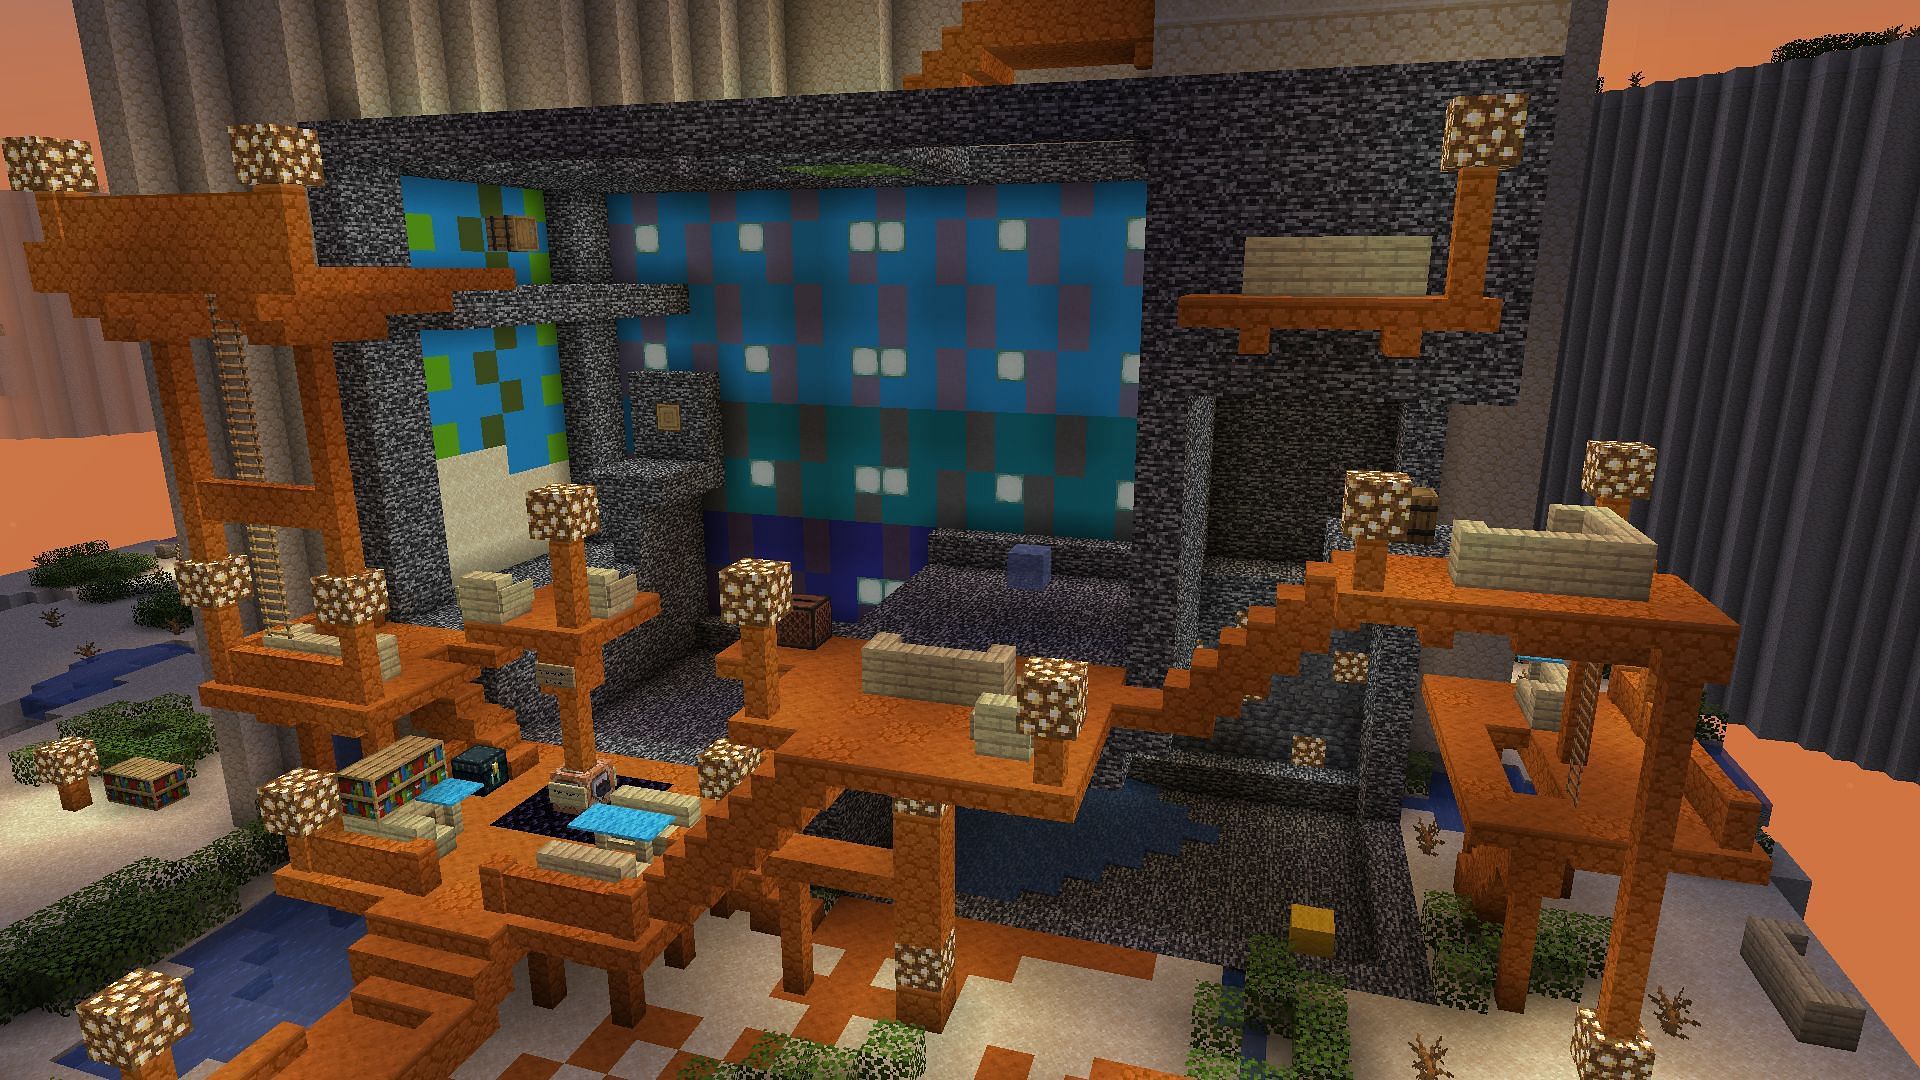 This map has an entire island full of puzzles and challenges for players (Image via MinecraftMaps)